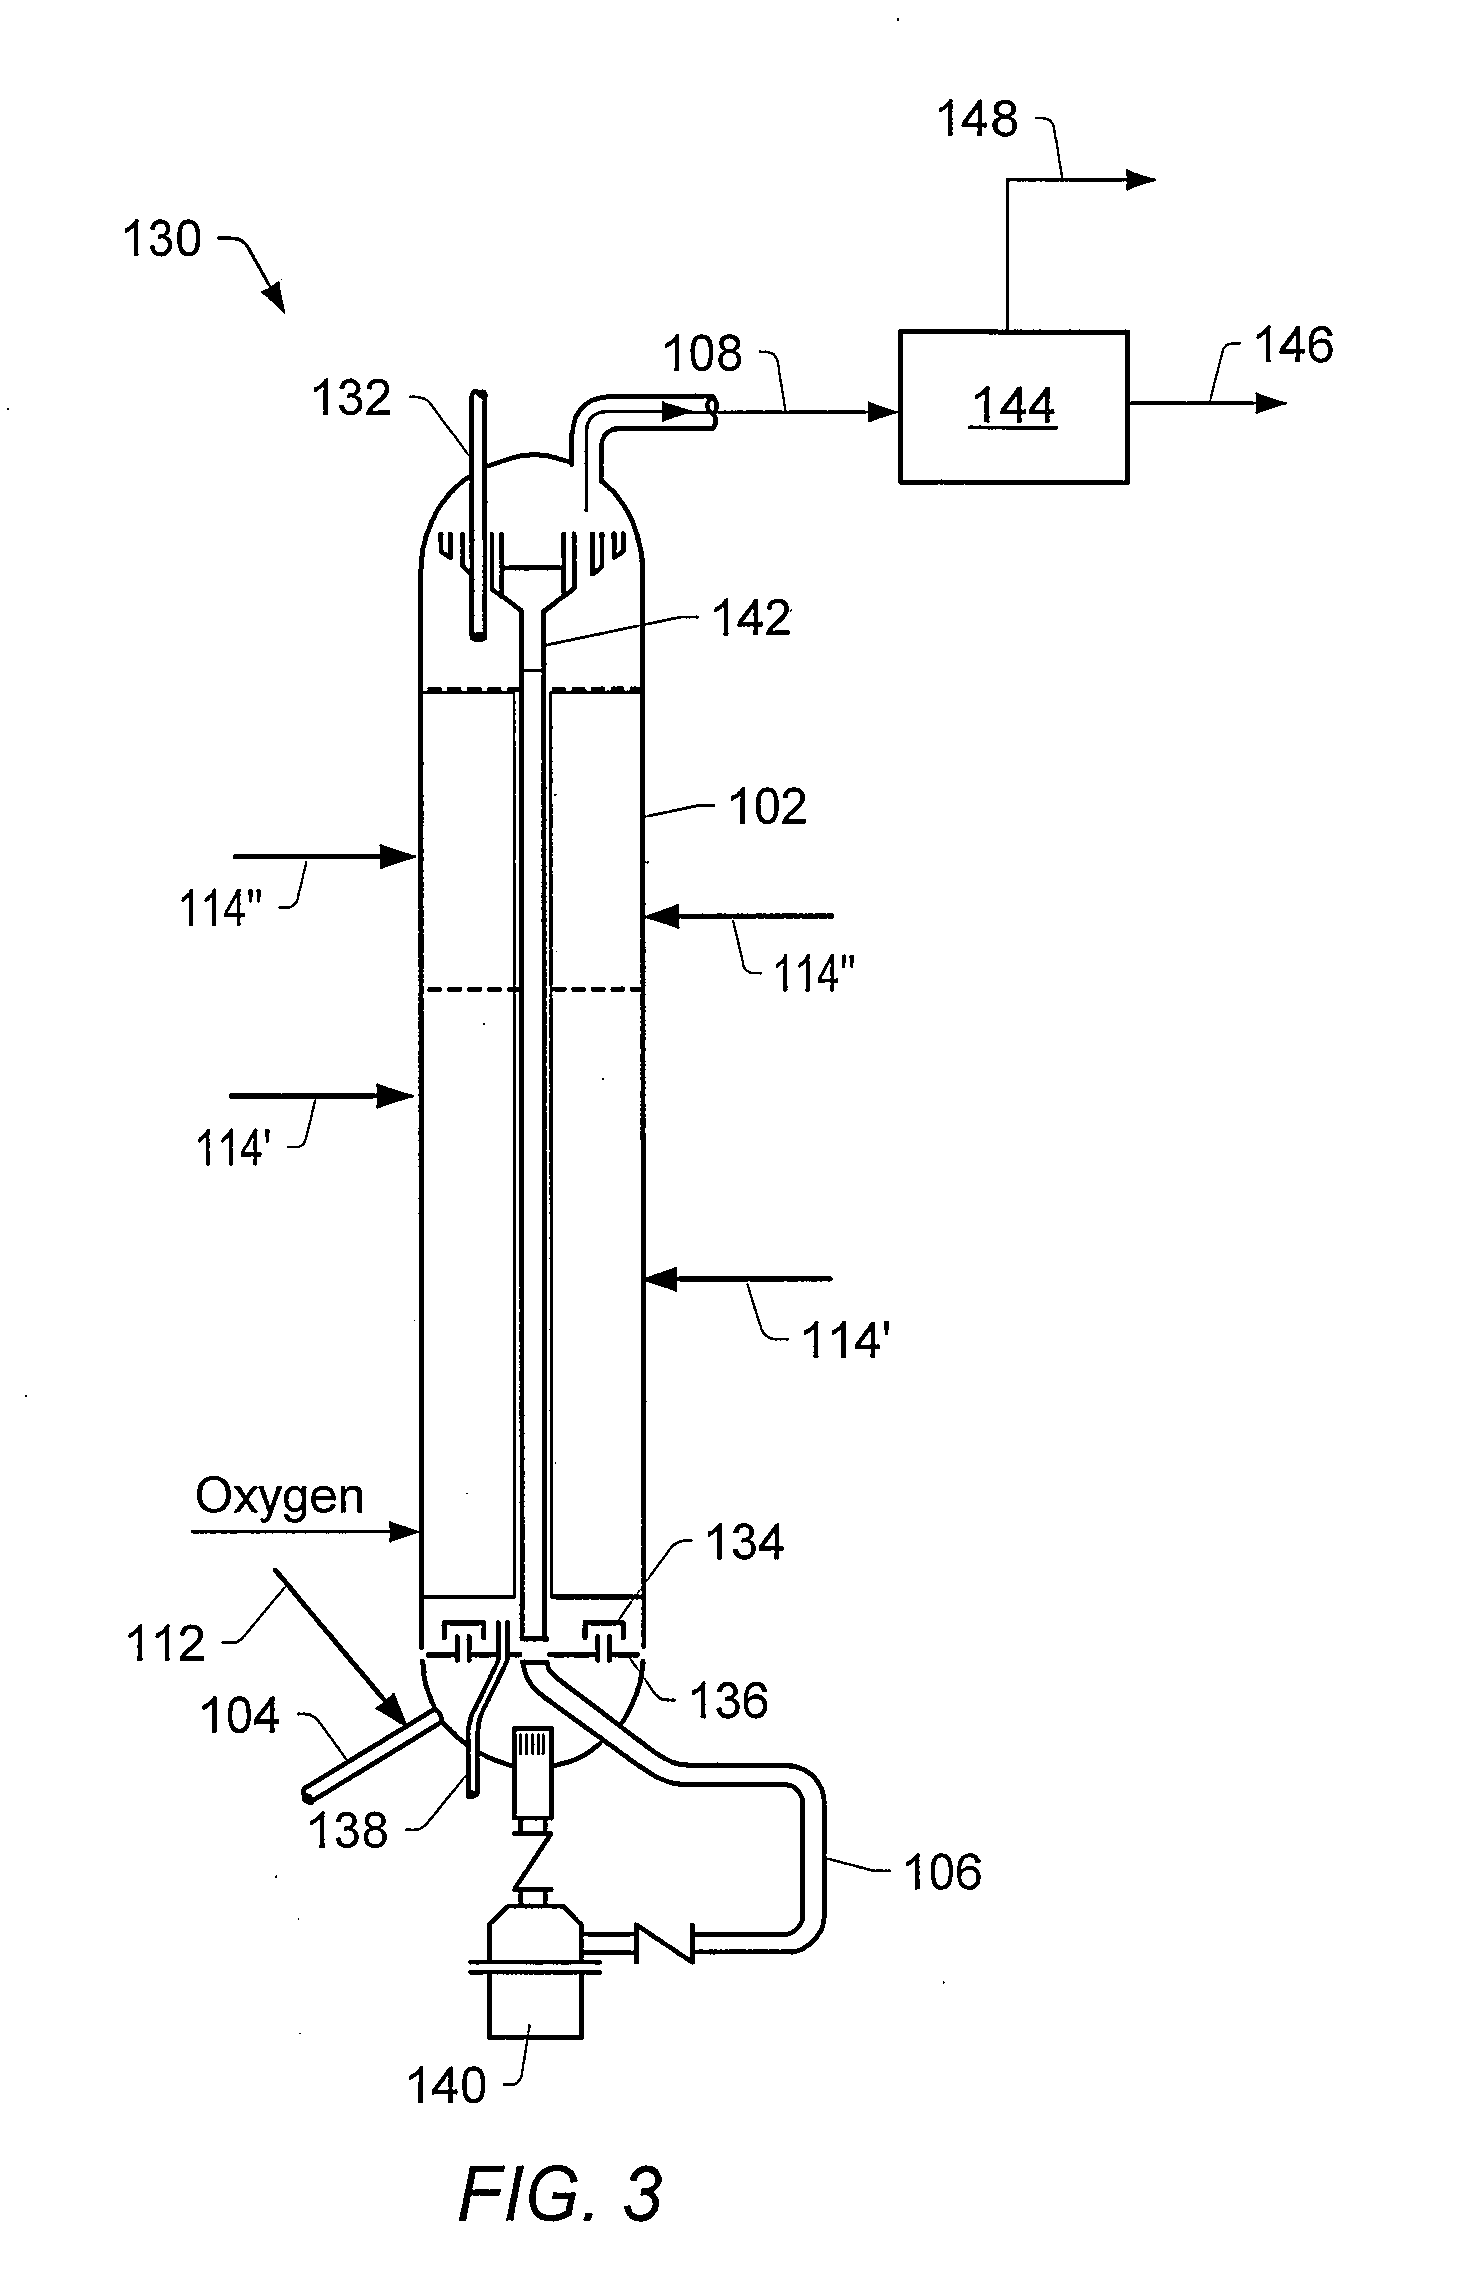 Methods for producing a total product at selected temperatures